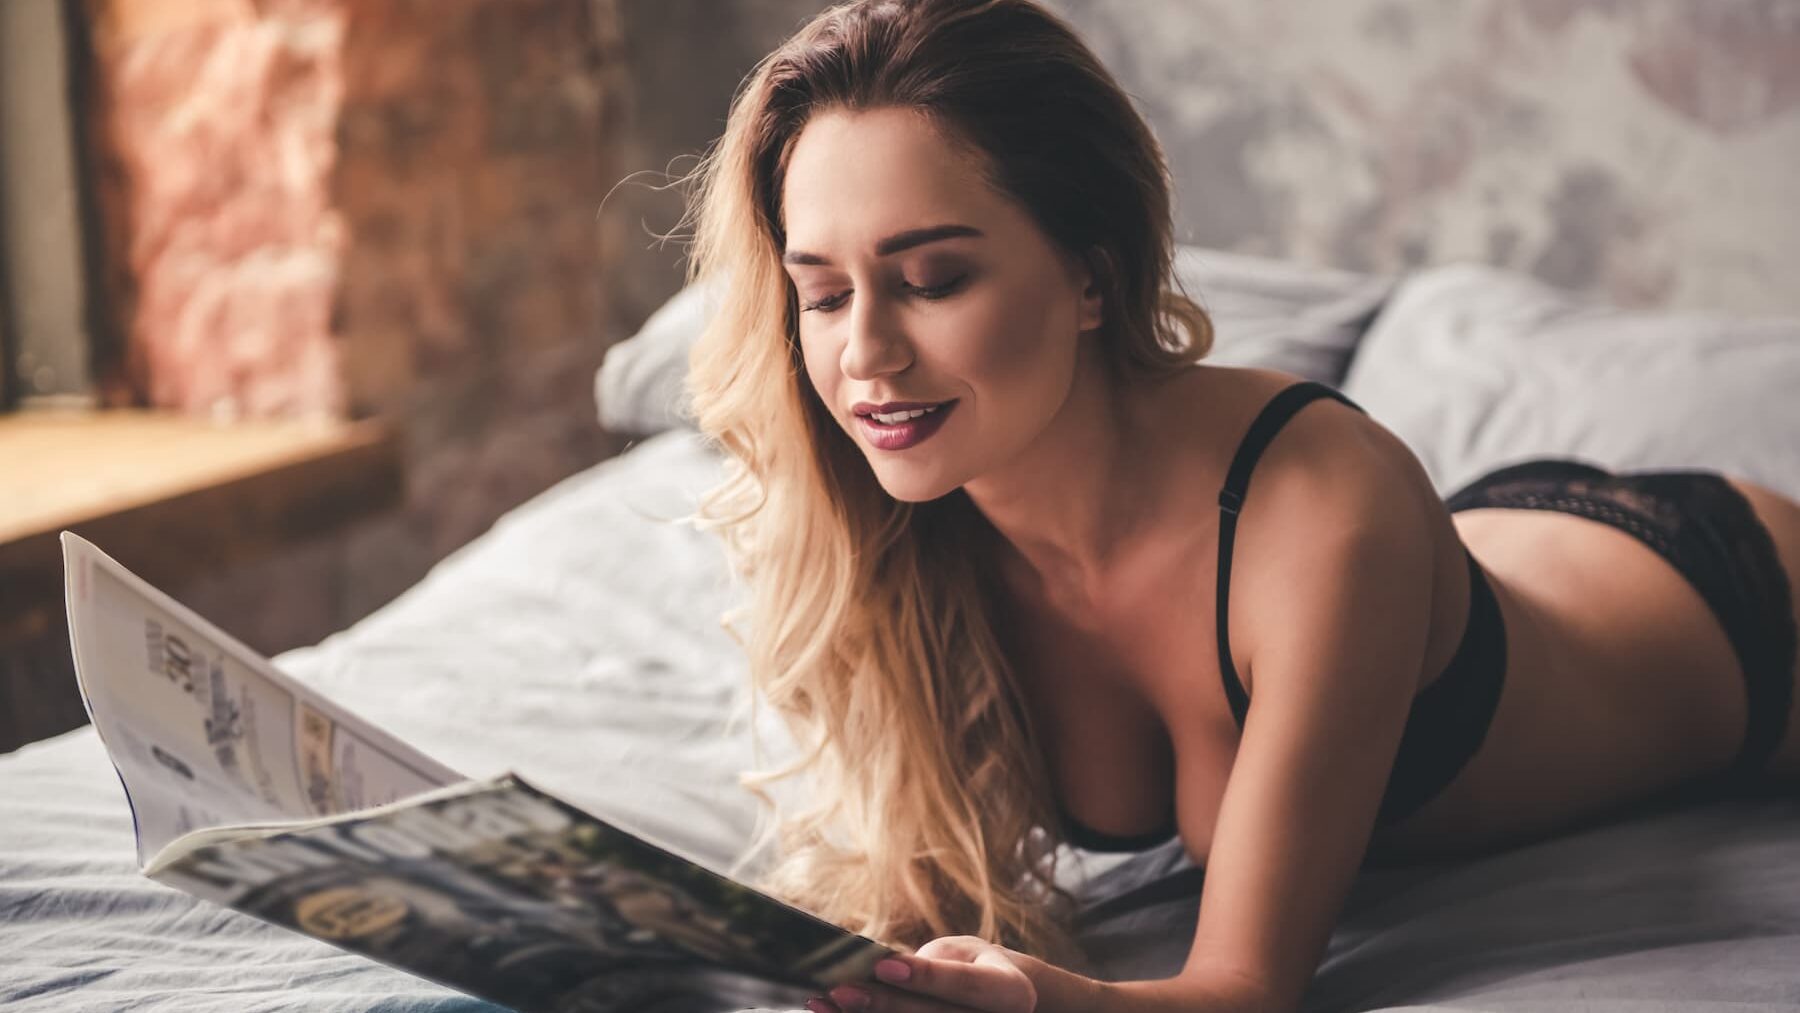 Sexy woman in lingerie lying in bed reading magazine.